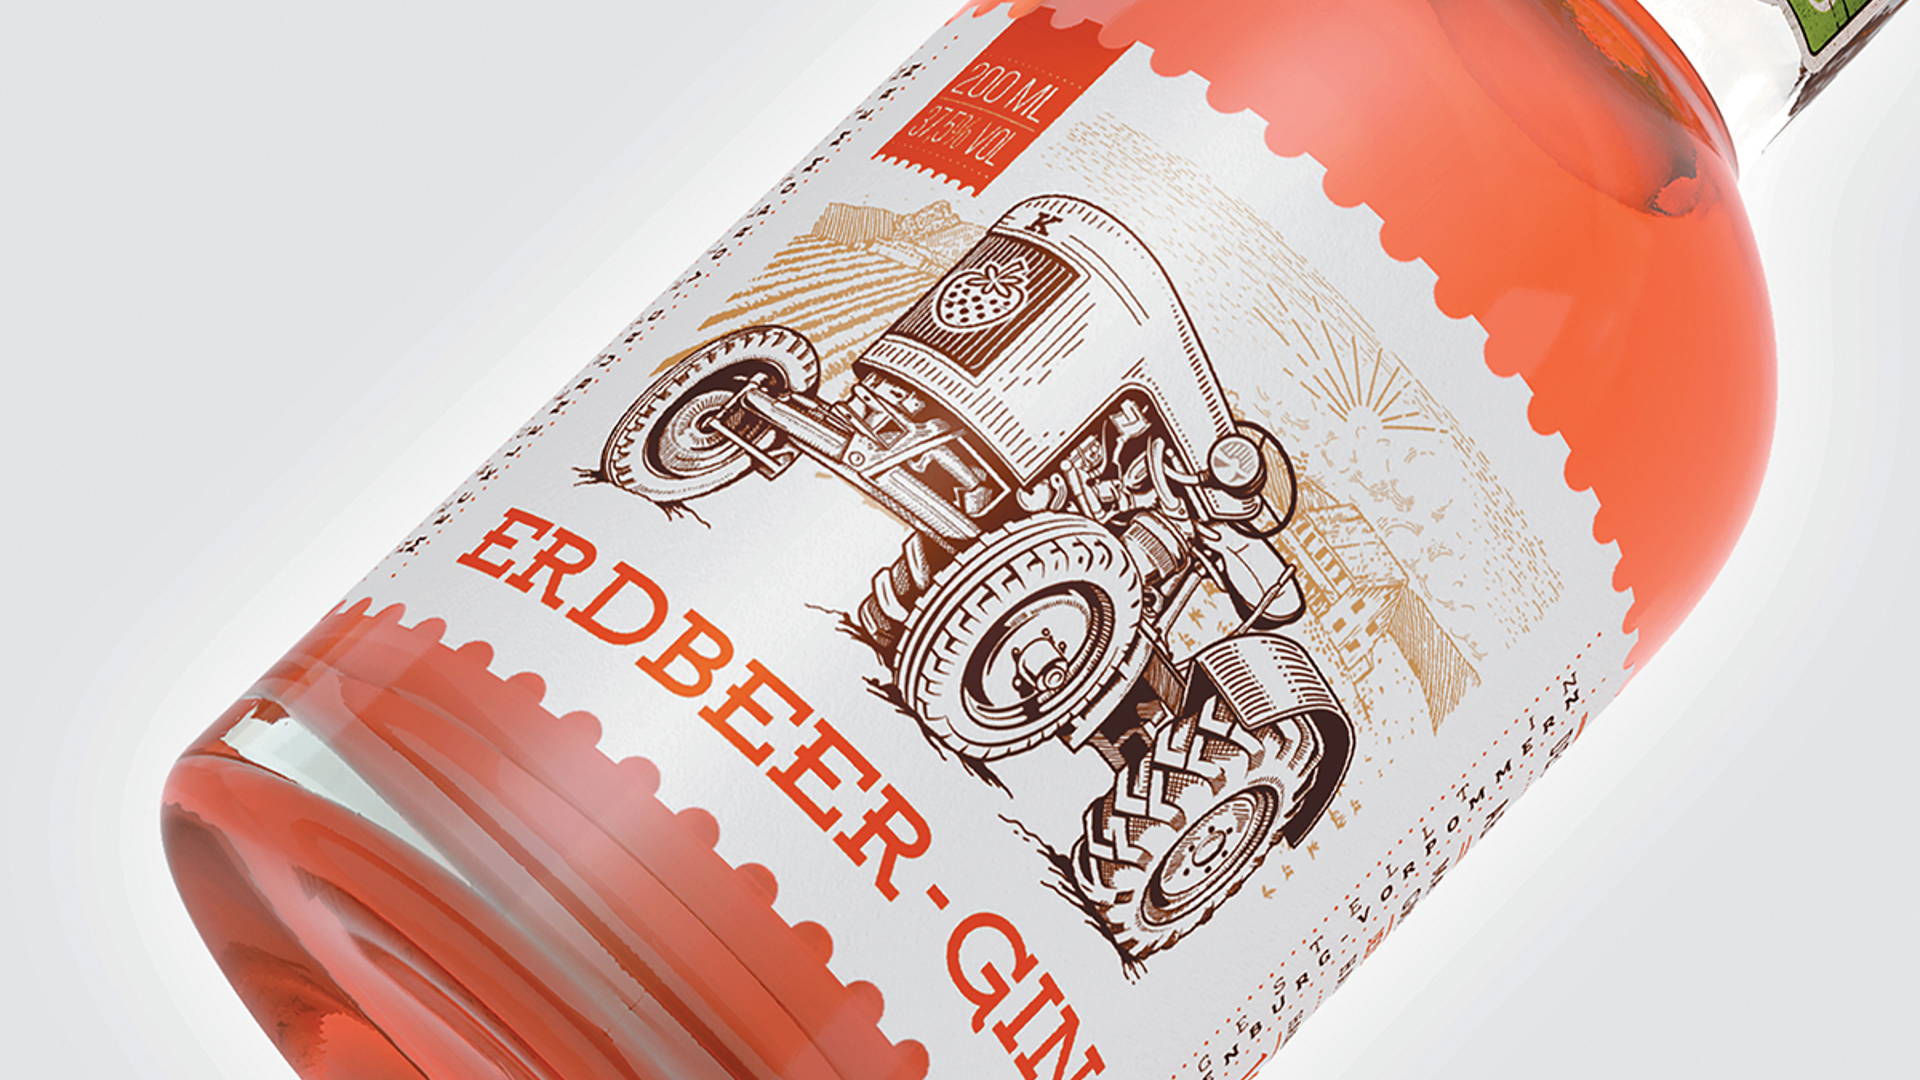 Featured image for Erdbeer Gin is Inspired By Old Traditions